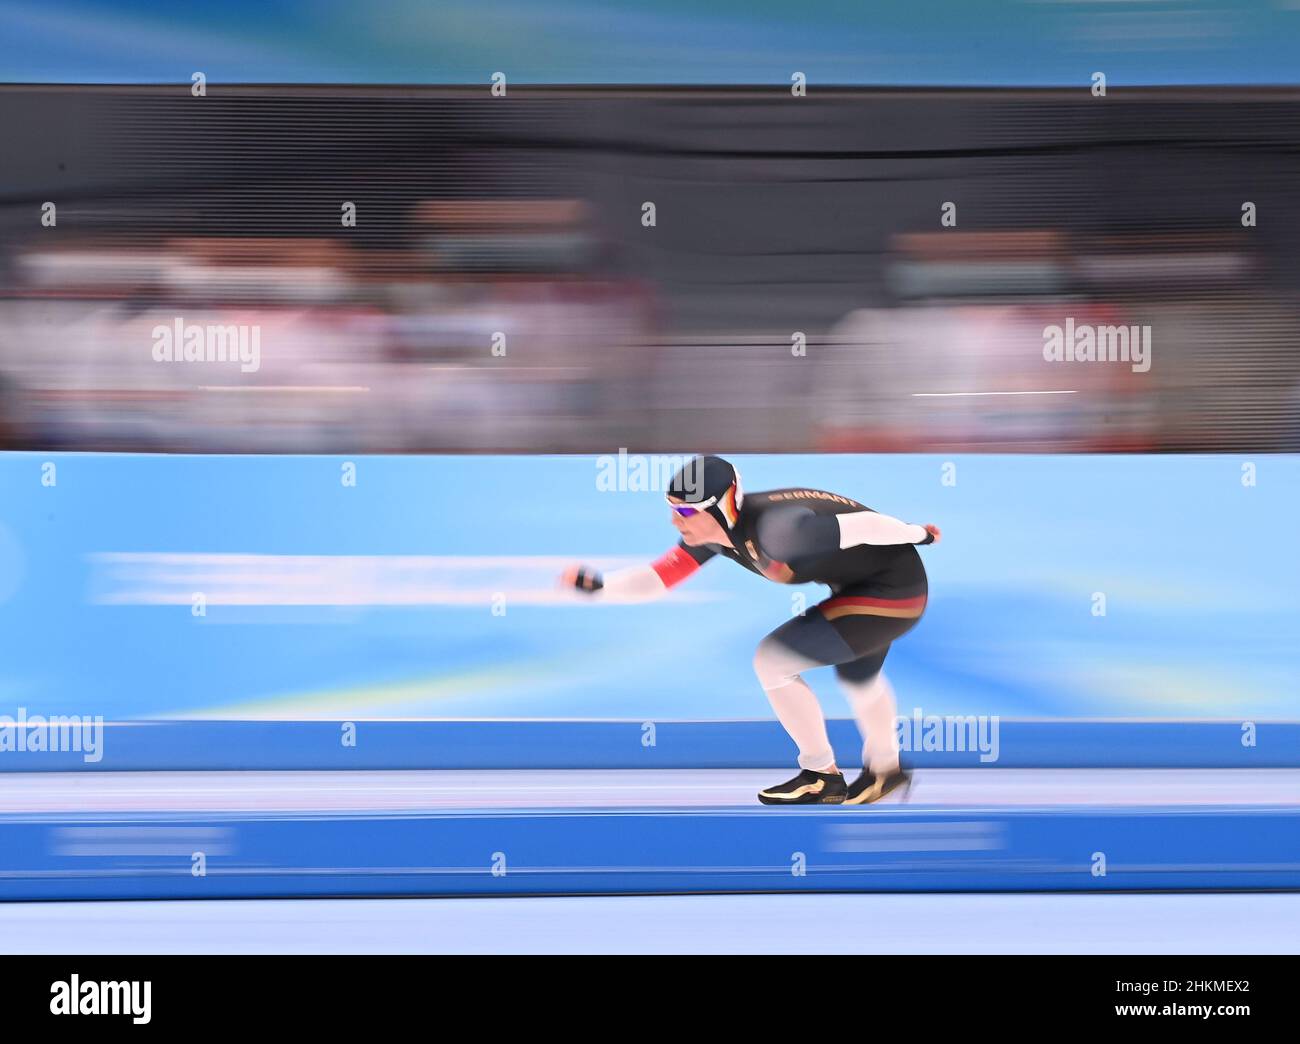 Beijing, China. 5th Feb, 2022. Claudia Pechstein of Germany competes during the women's 3,000m final of speed skating at the National Speed Skating Oval in Beijing, capital of China, Feb. 5, 2022. Credit: Wu Wei/Xinhua/Alamy Live News Stock Photo